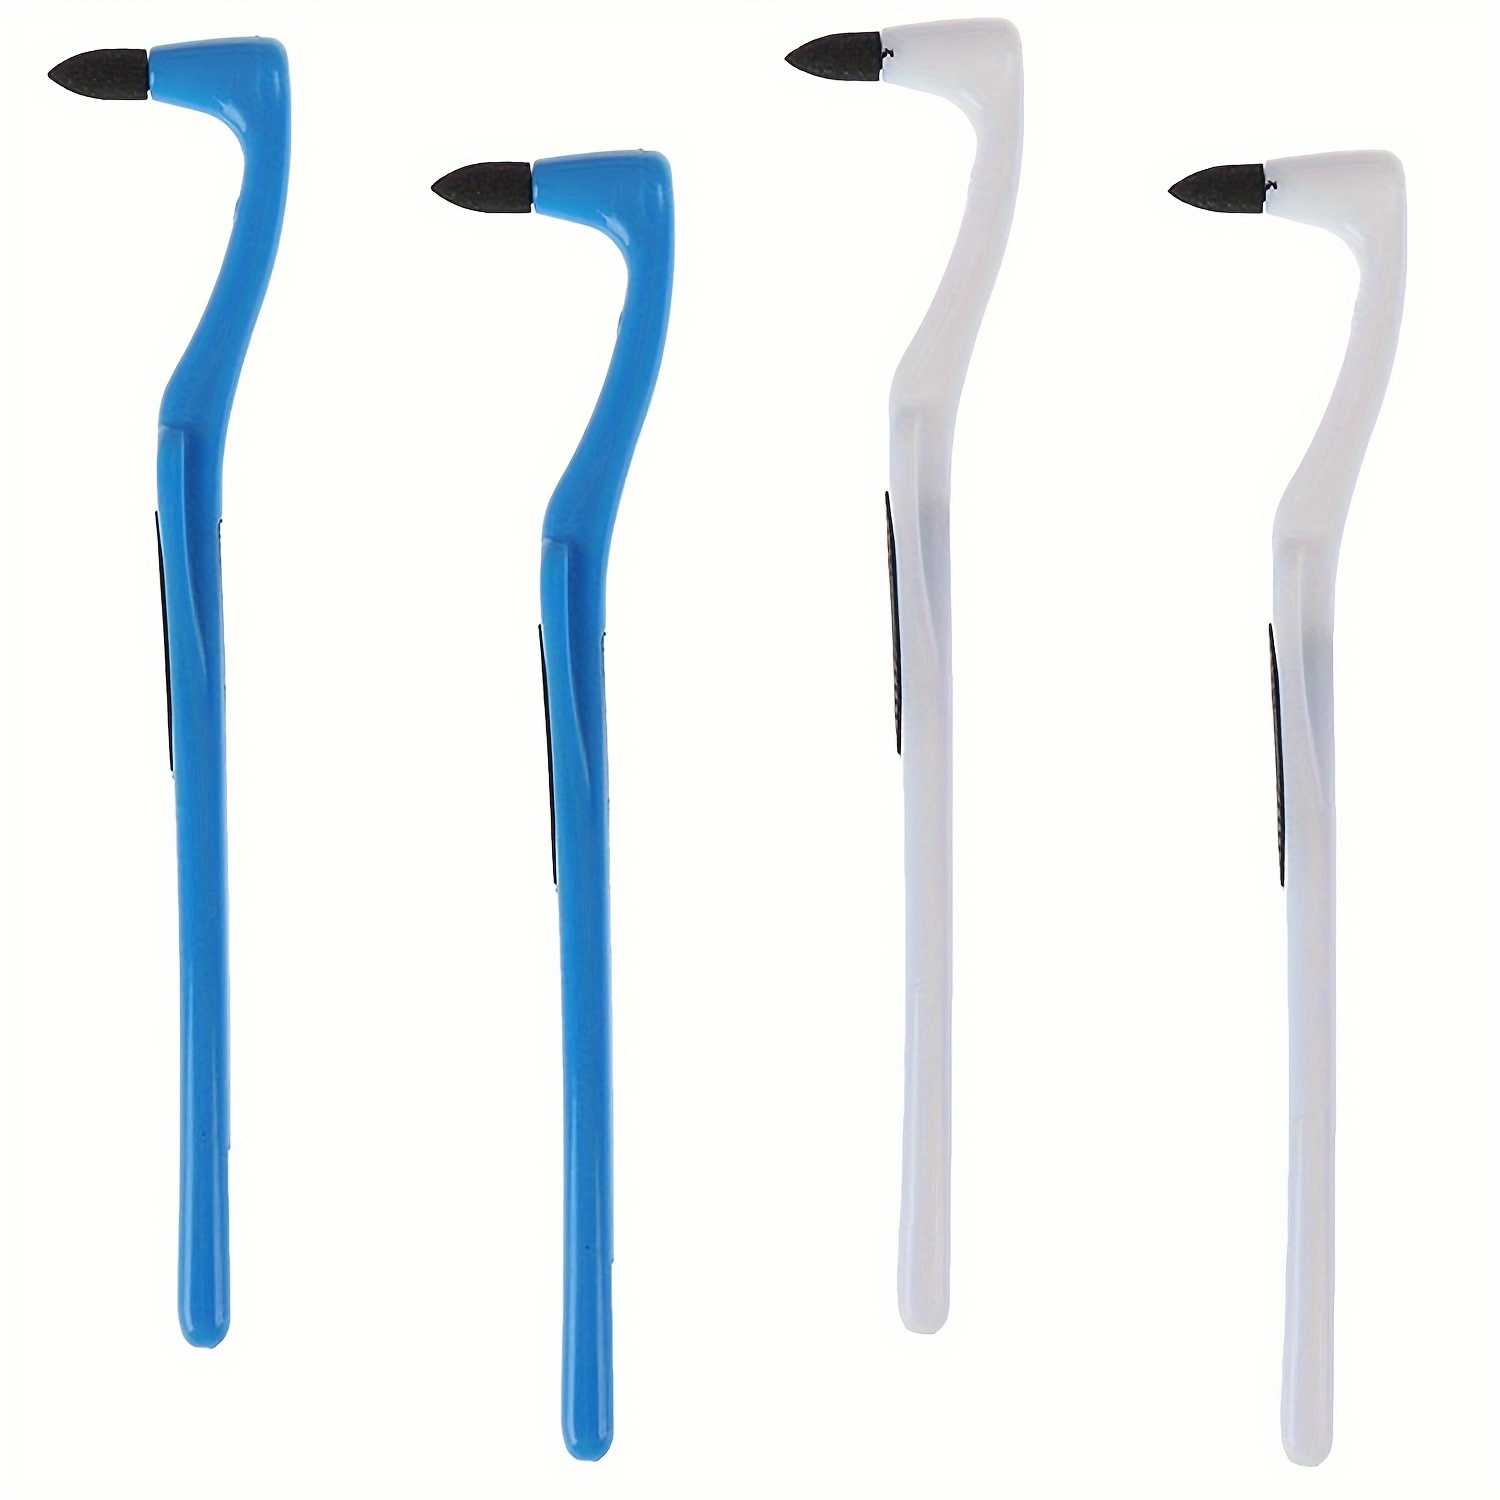 

4-pack Ergonomic Tooth Stain Removers - Durable, Odorless Dental Tools For Adults | Effective Plaque & Tartar Cleaning